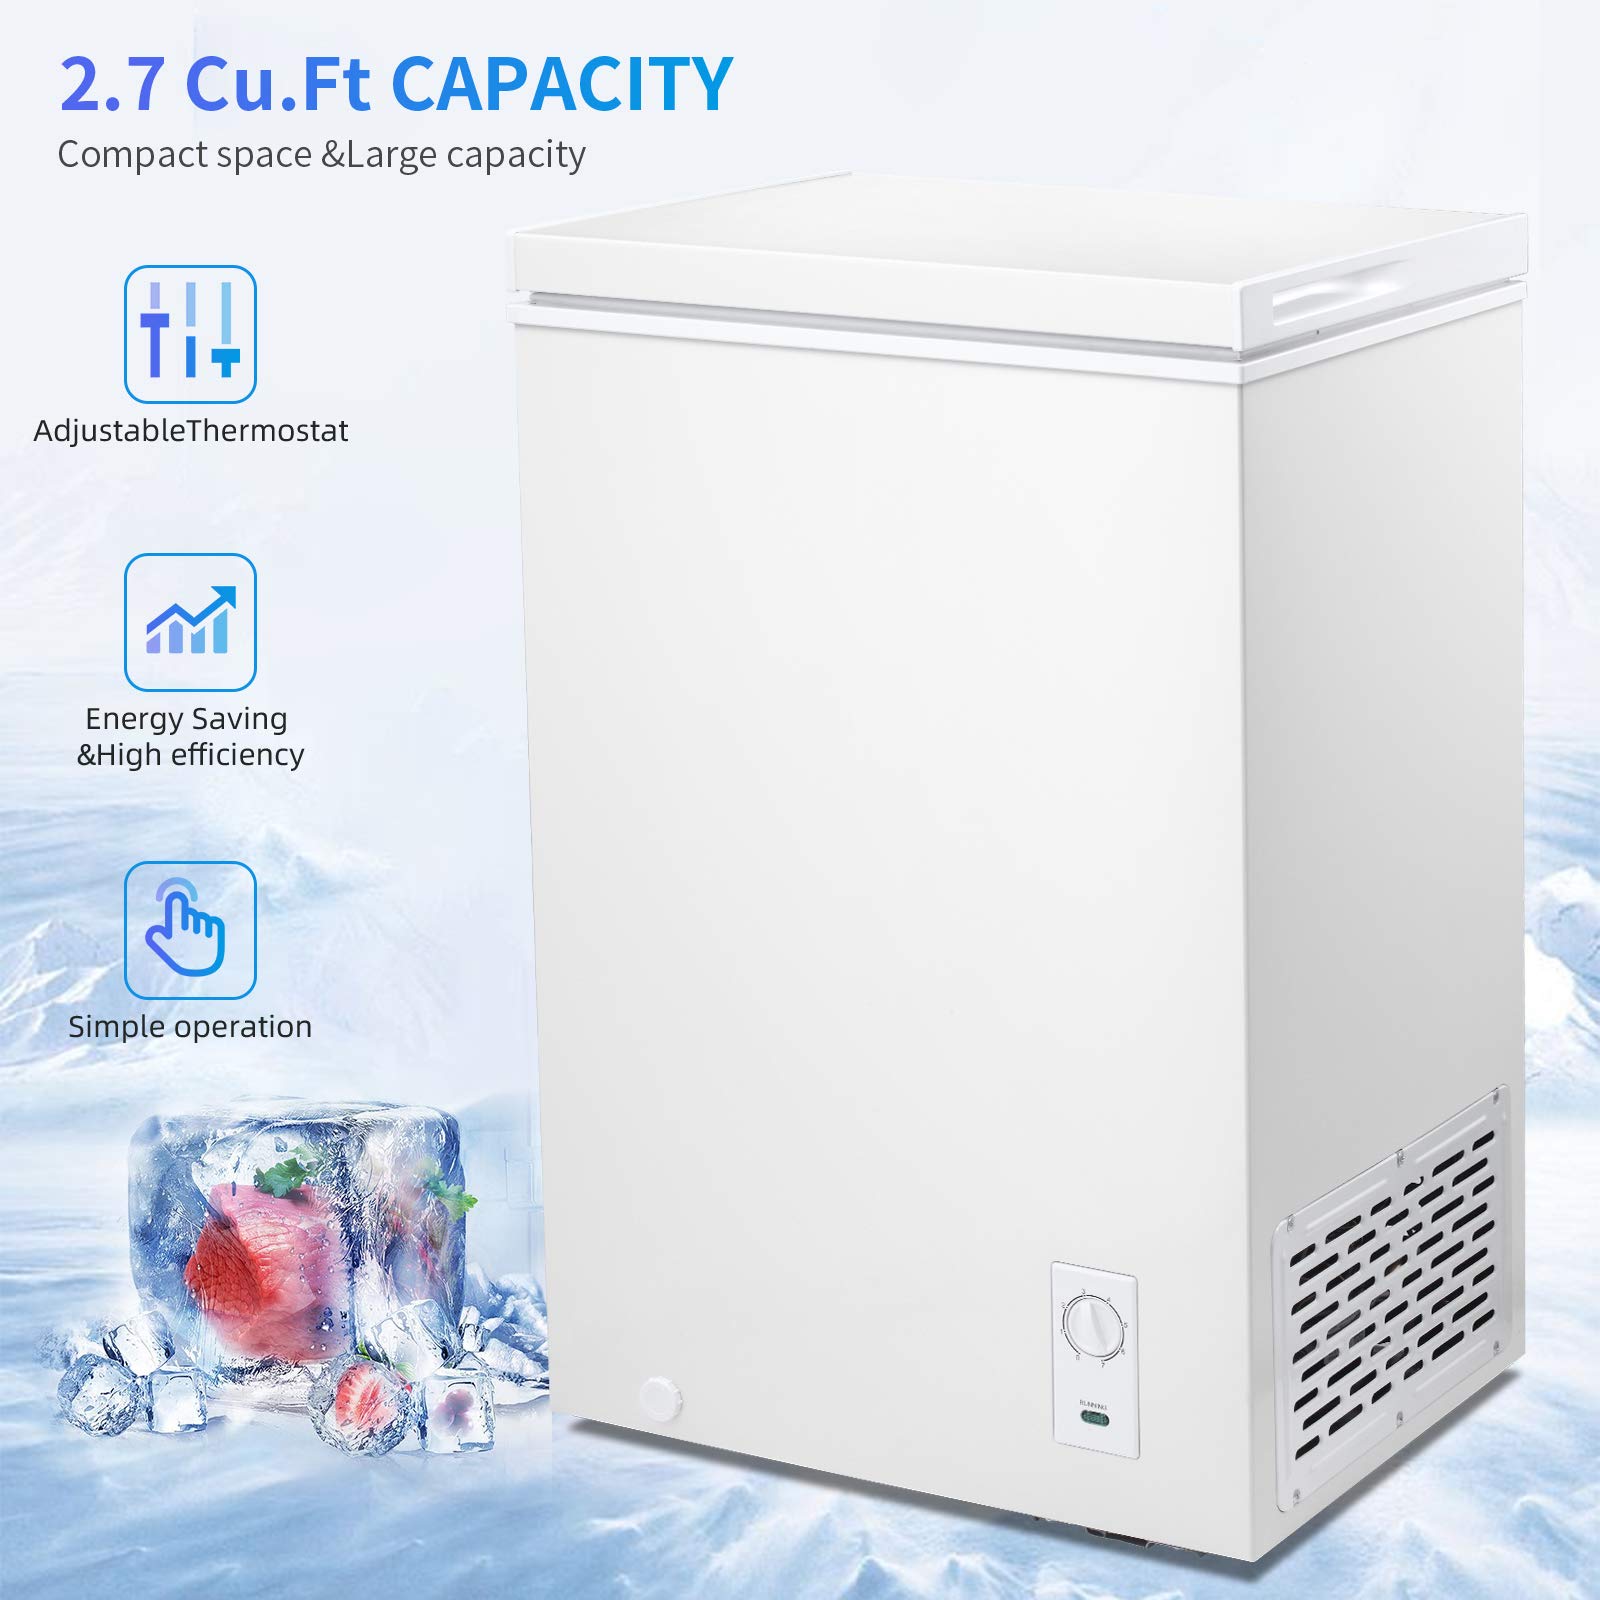 Kismile 2.7 Cubic Feet Chest Freezer with Removable Basket Free Standing Top Open Door Compact Freezer with Adjustable Temperature for Home/Kitchen/Office/Bar (2.7 Cubic Feet, White)